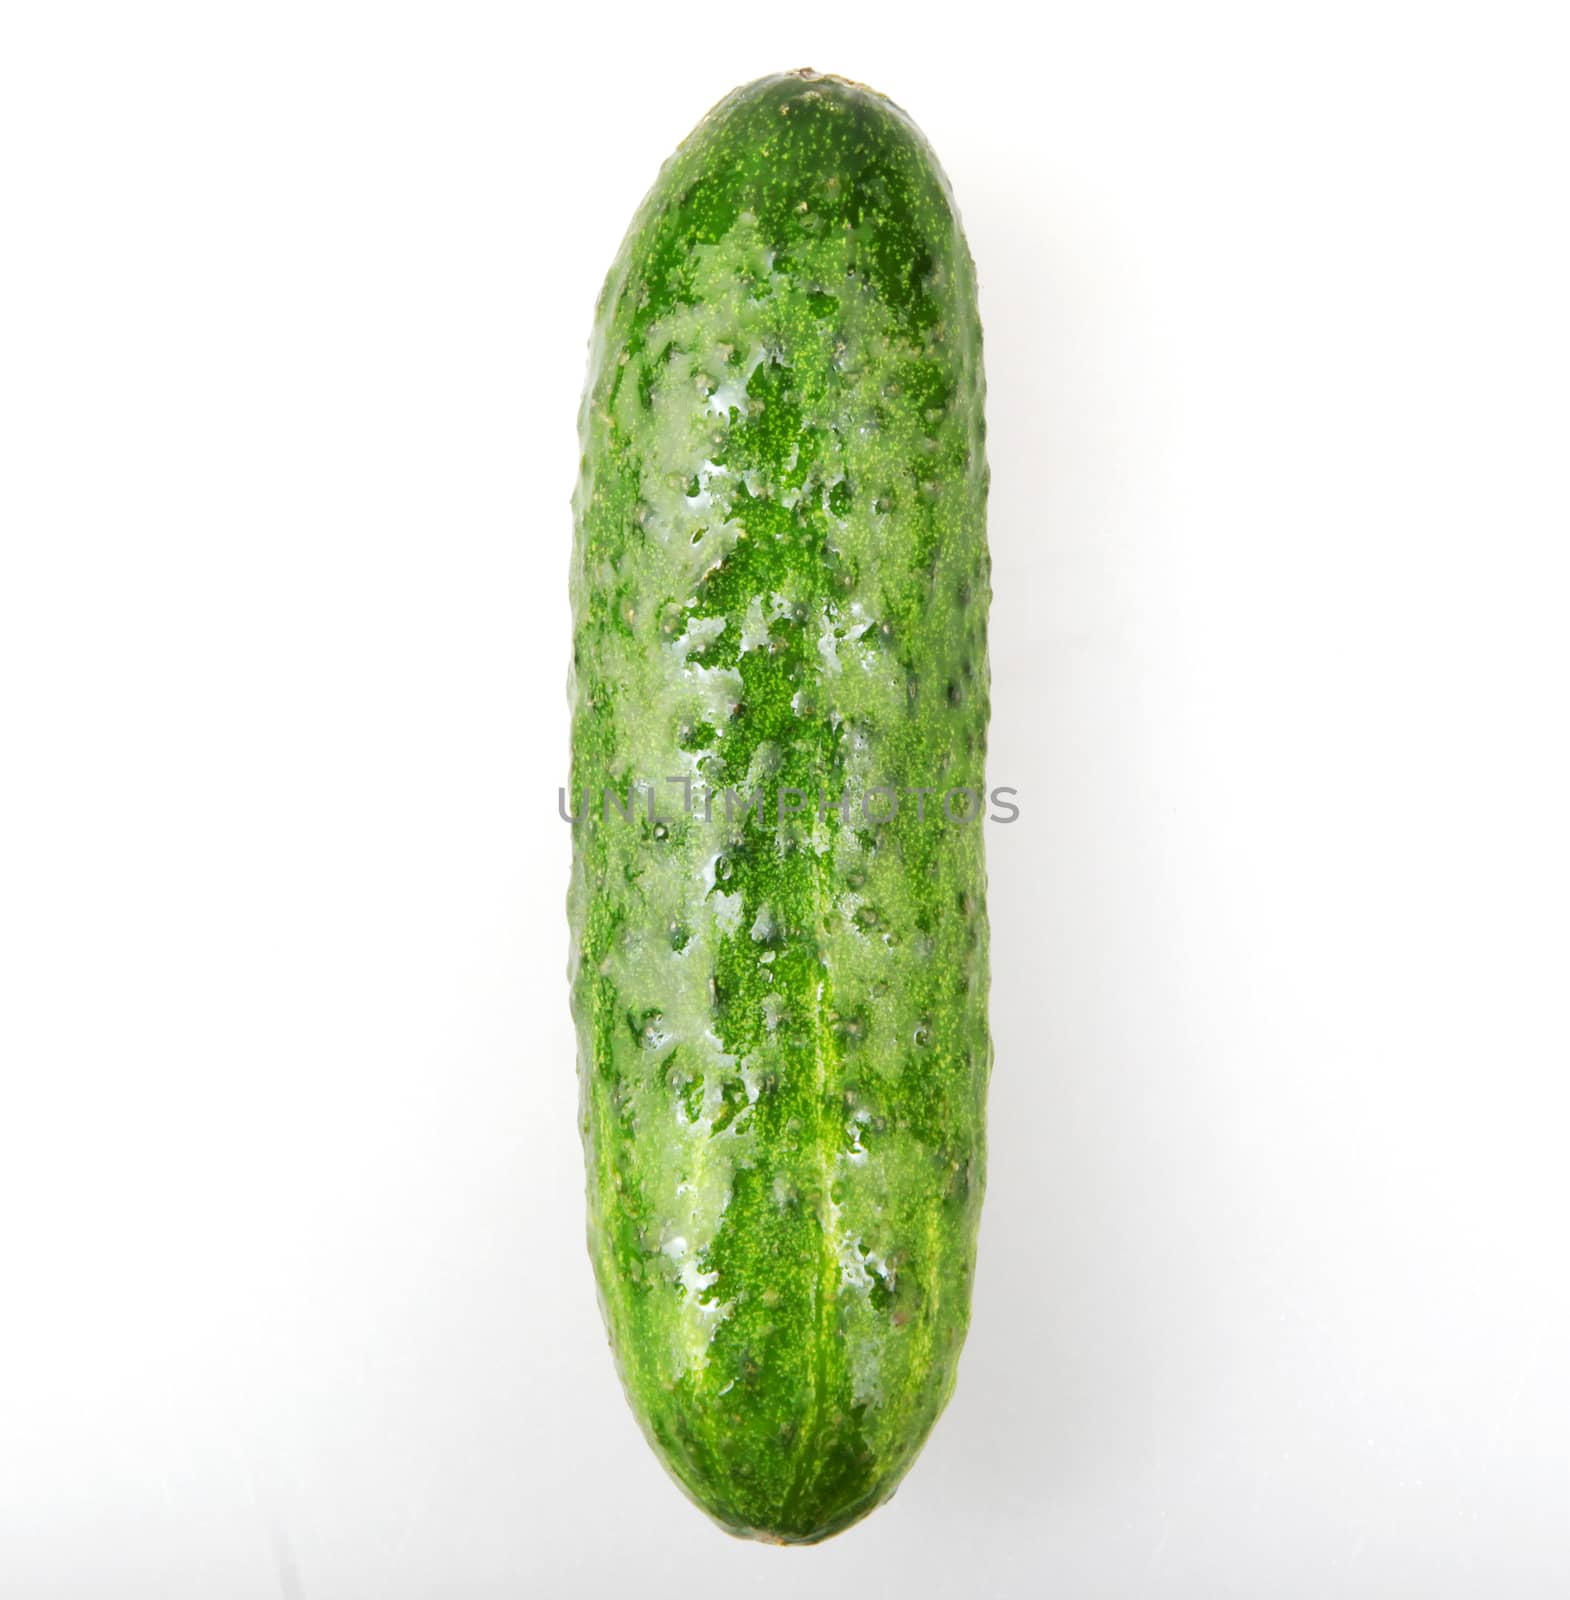 Fresh Cucumber Against White Background by nenovbrothers